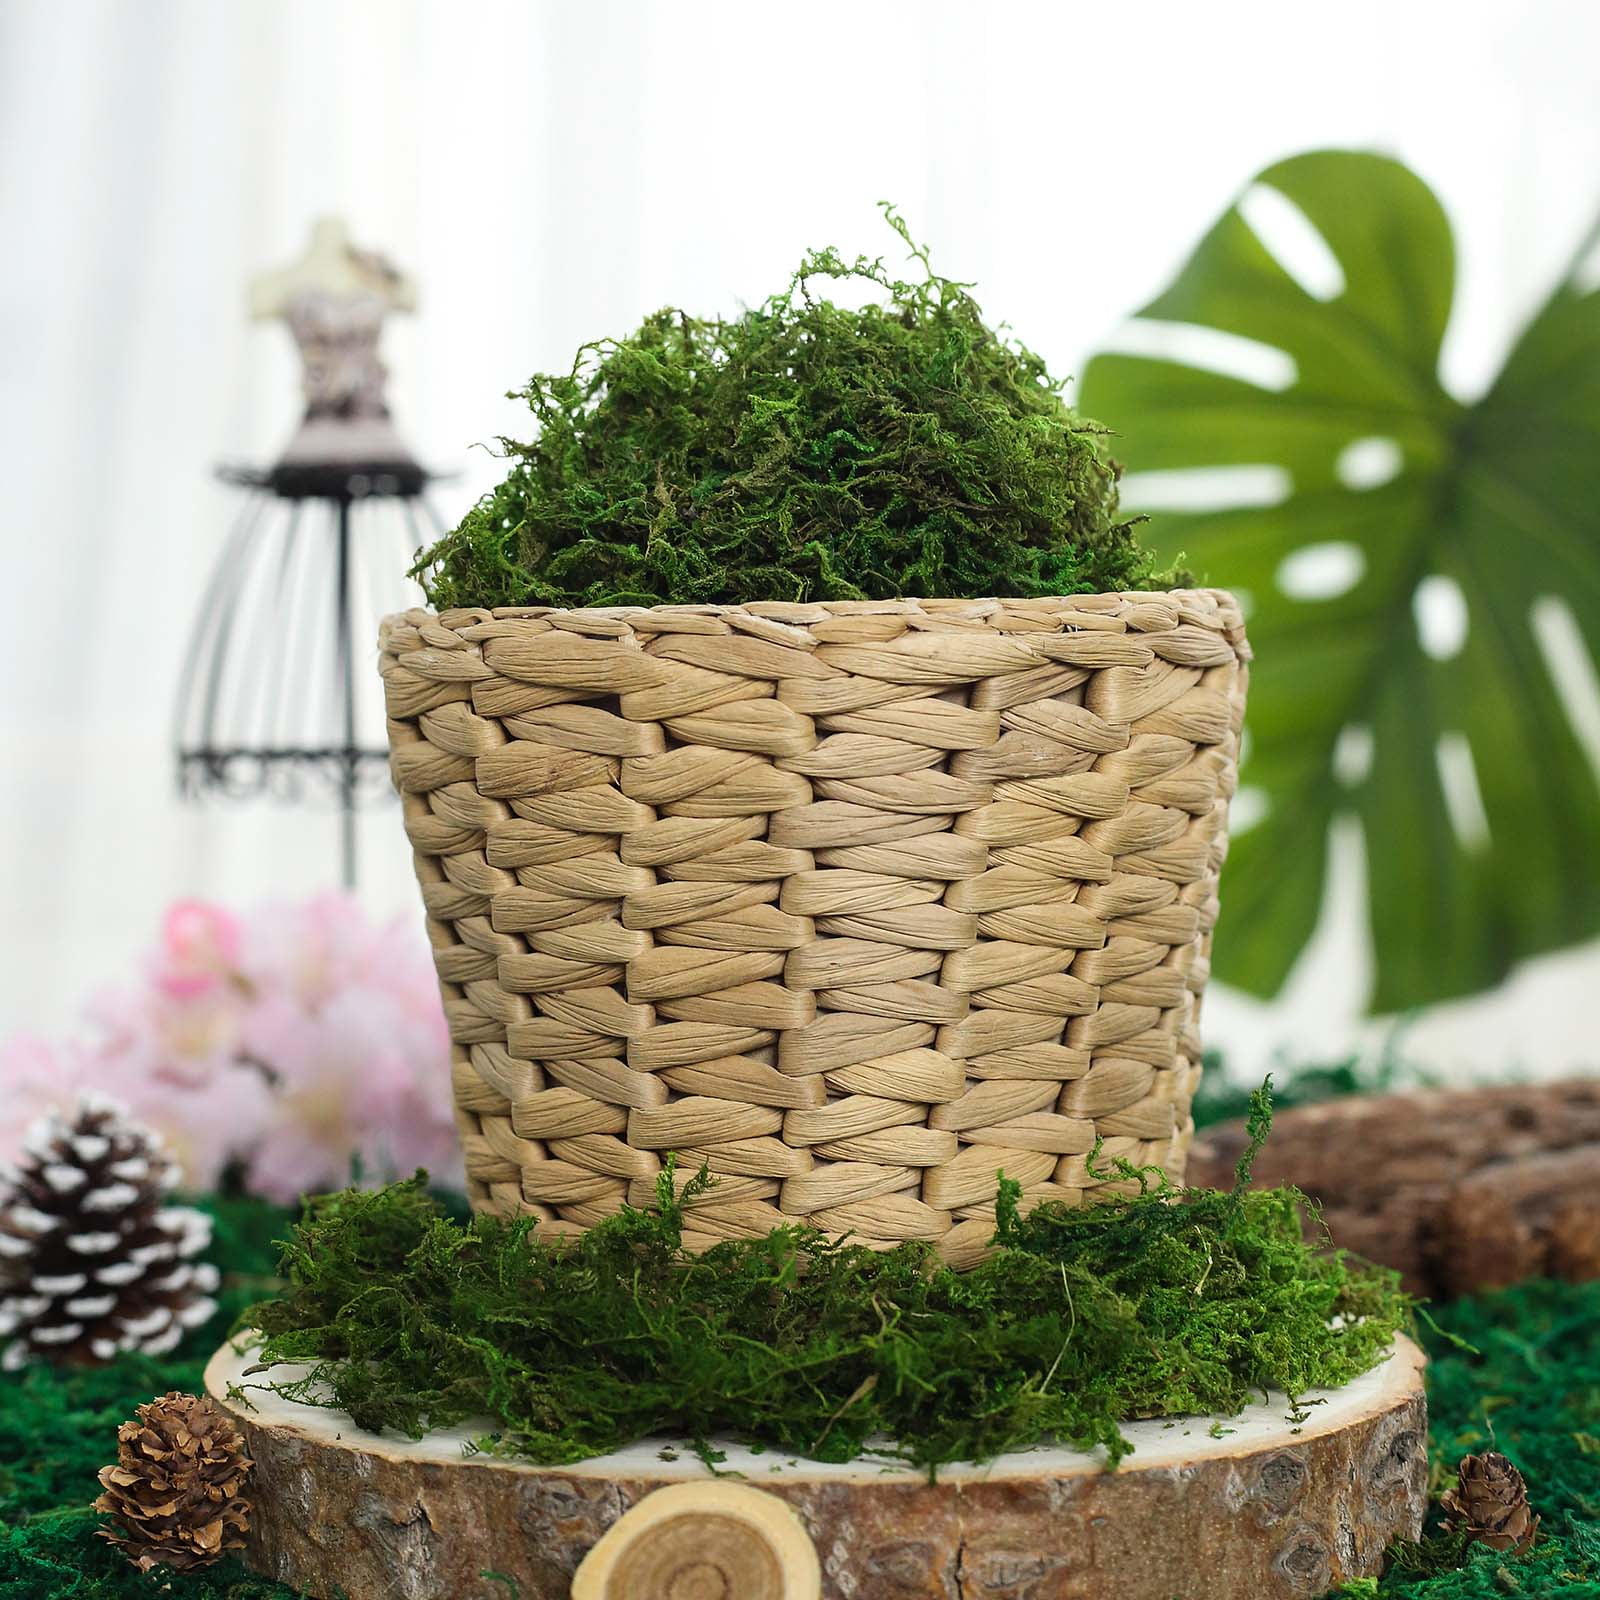 Balsacircle 18 inch x 16 inch Green Natural Preserved Moss Sheet Wedding Party Crafts Centerpieces Decorations, Size: 18 x 16